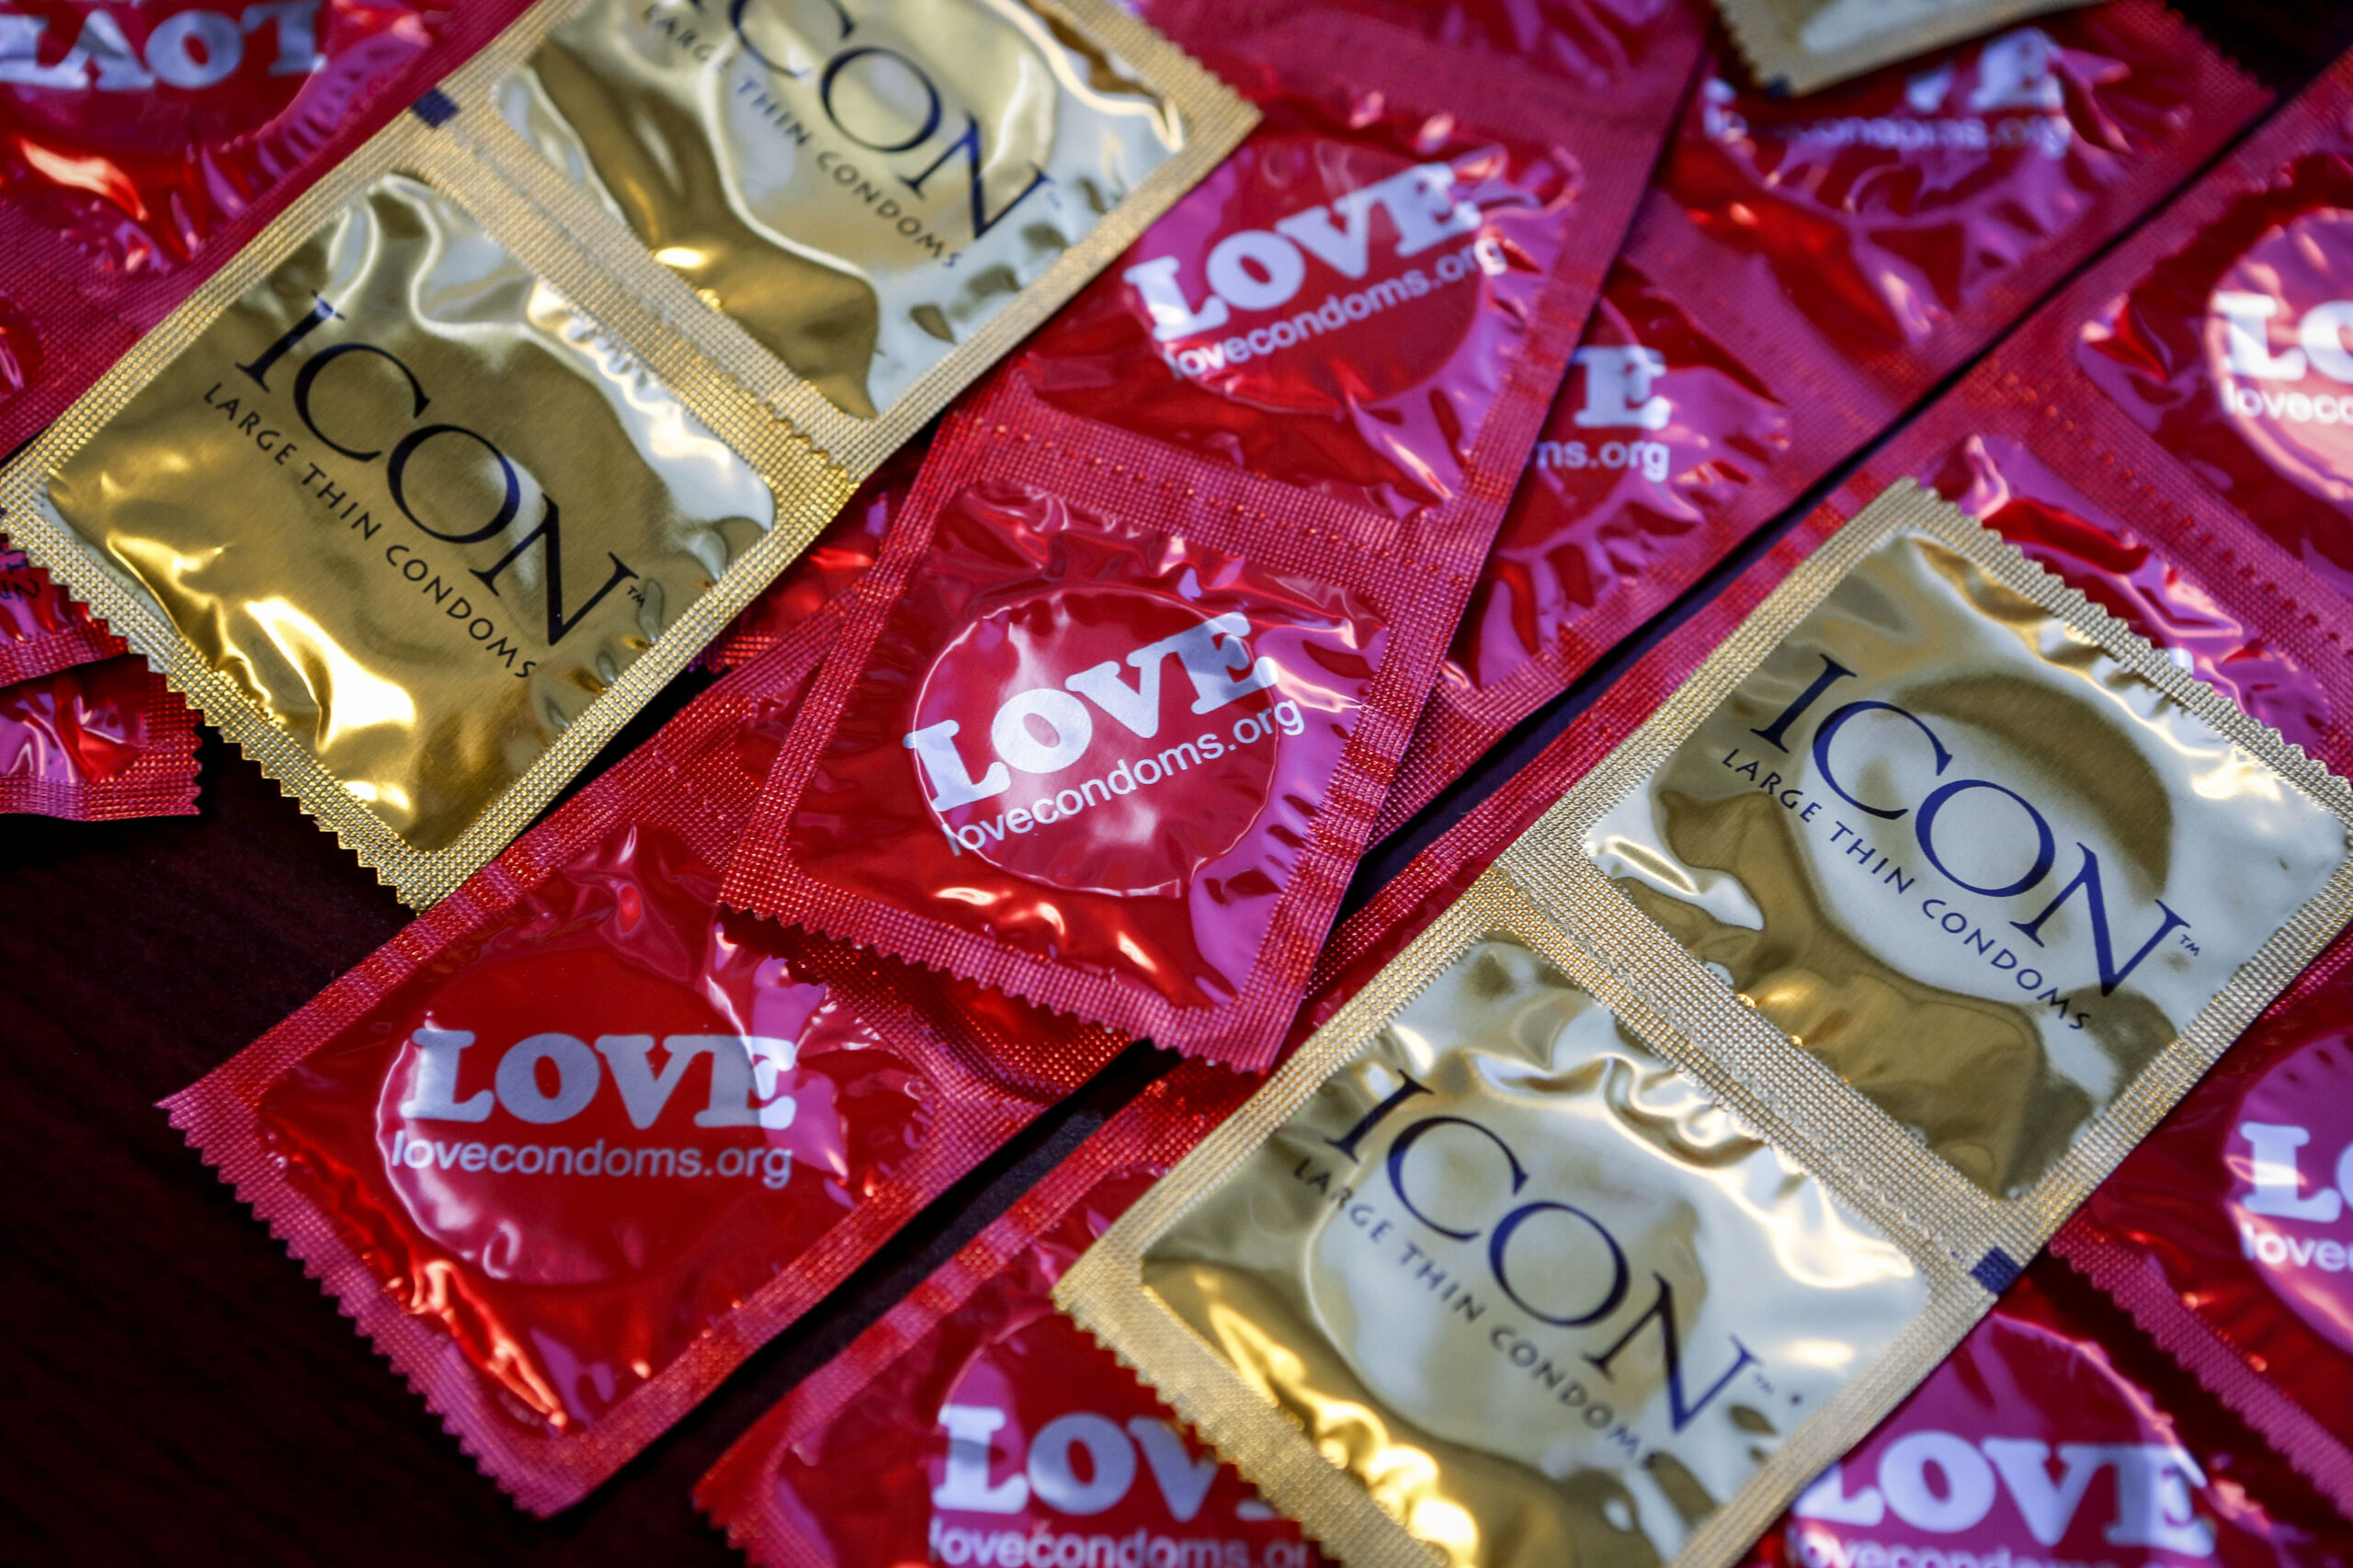 AIDS Healthcare Foundation condoms during a Valentine's Day press conference